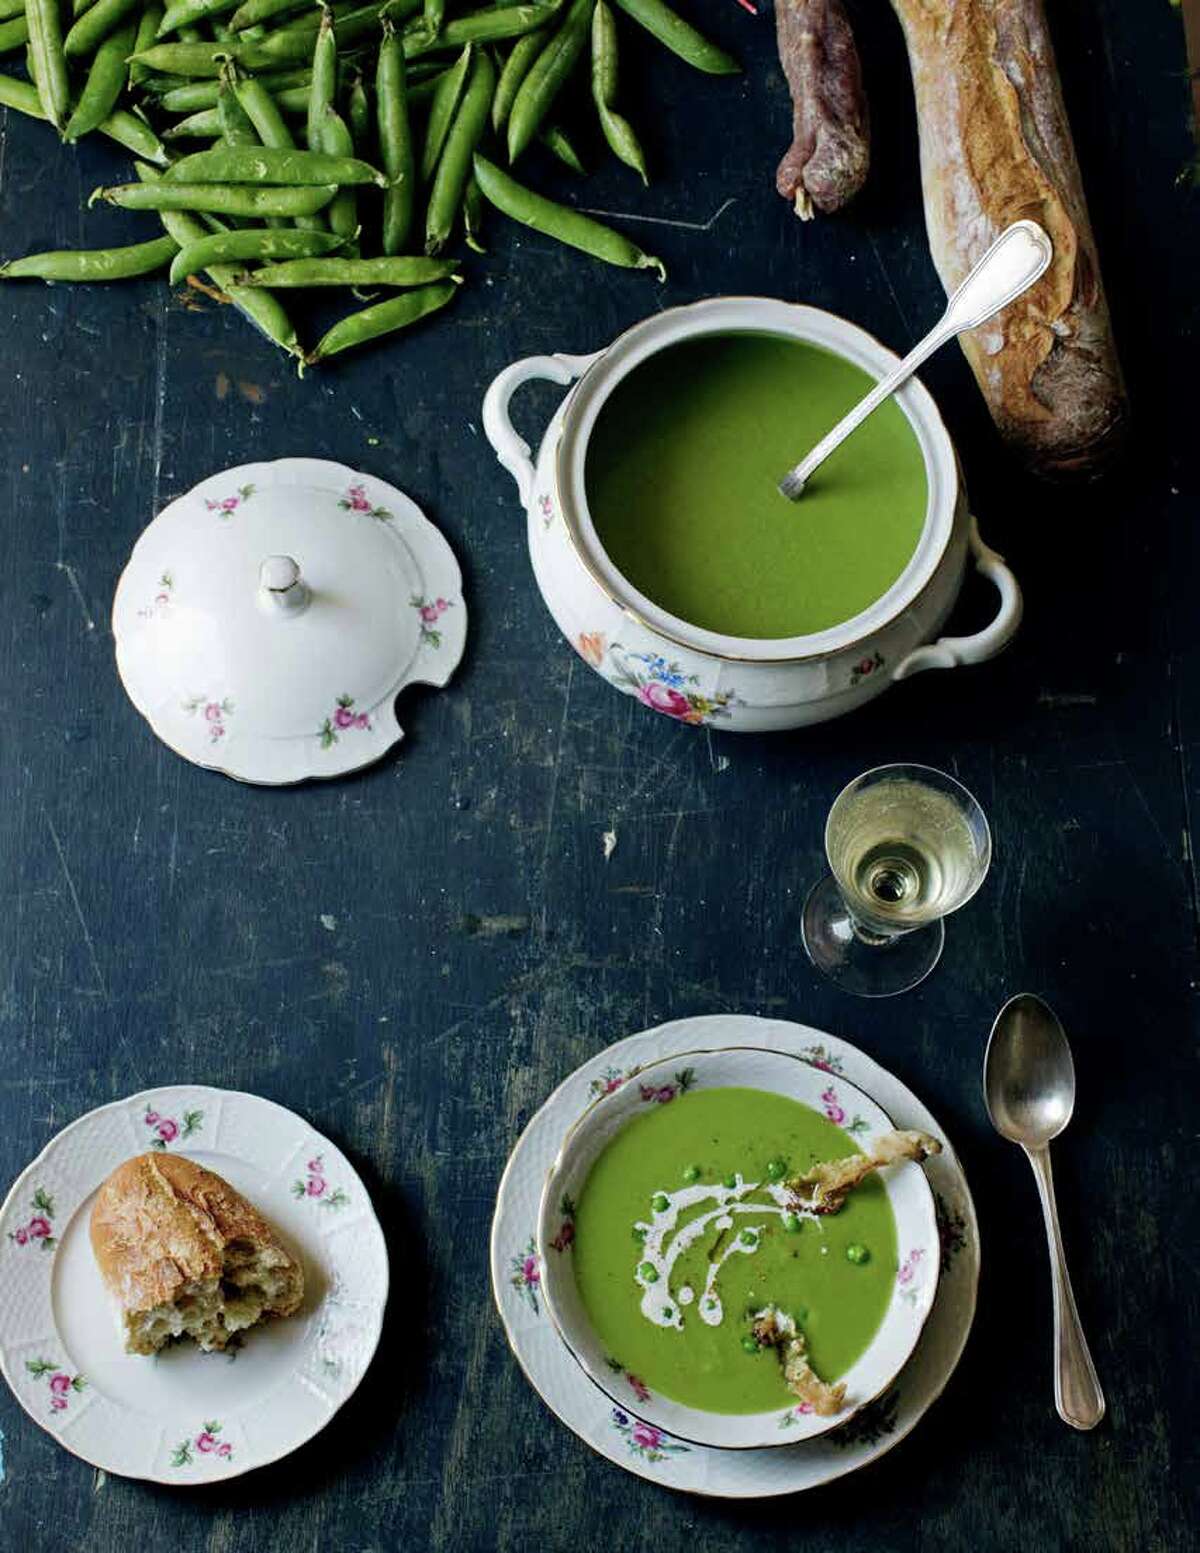 Chilled Garden Pea Velouté, reprinted from "A Kitchen in France: A Year of Cooking in My Farmhouse" (Clarkson Potter, an imprint of Random House LLC).